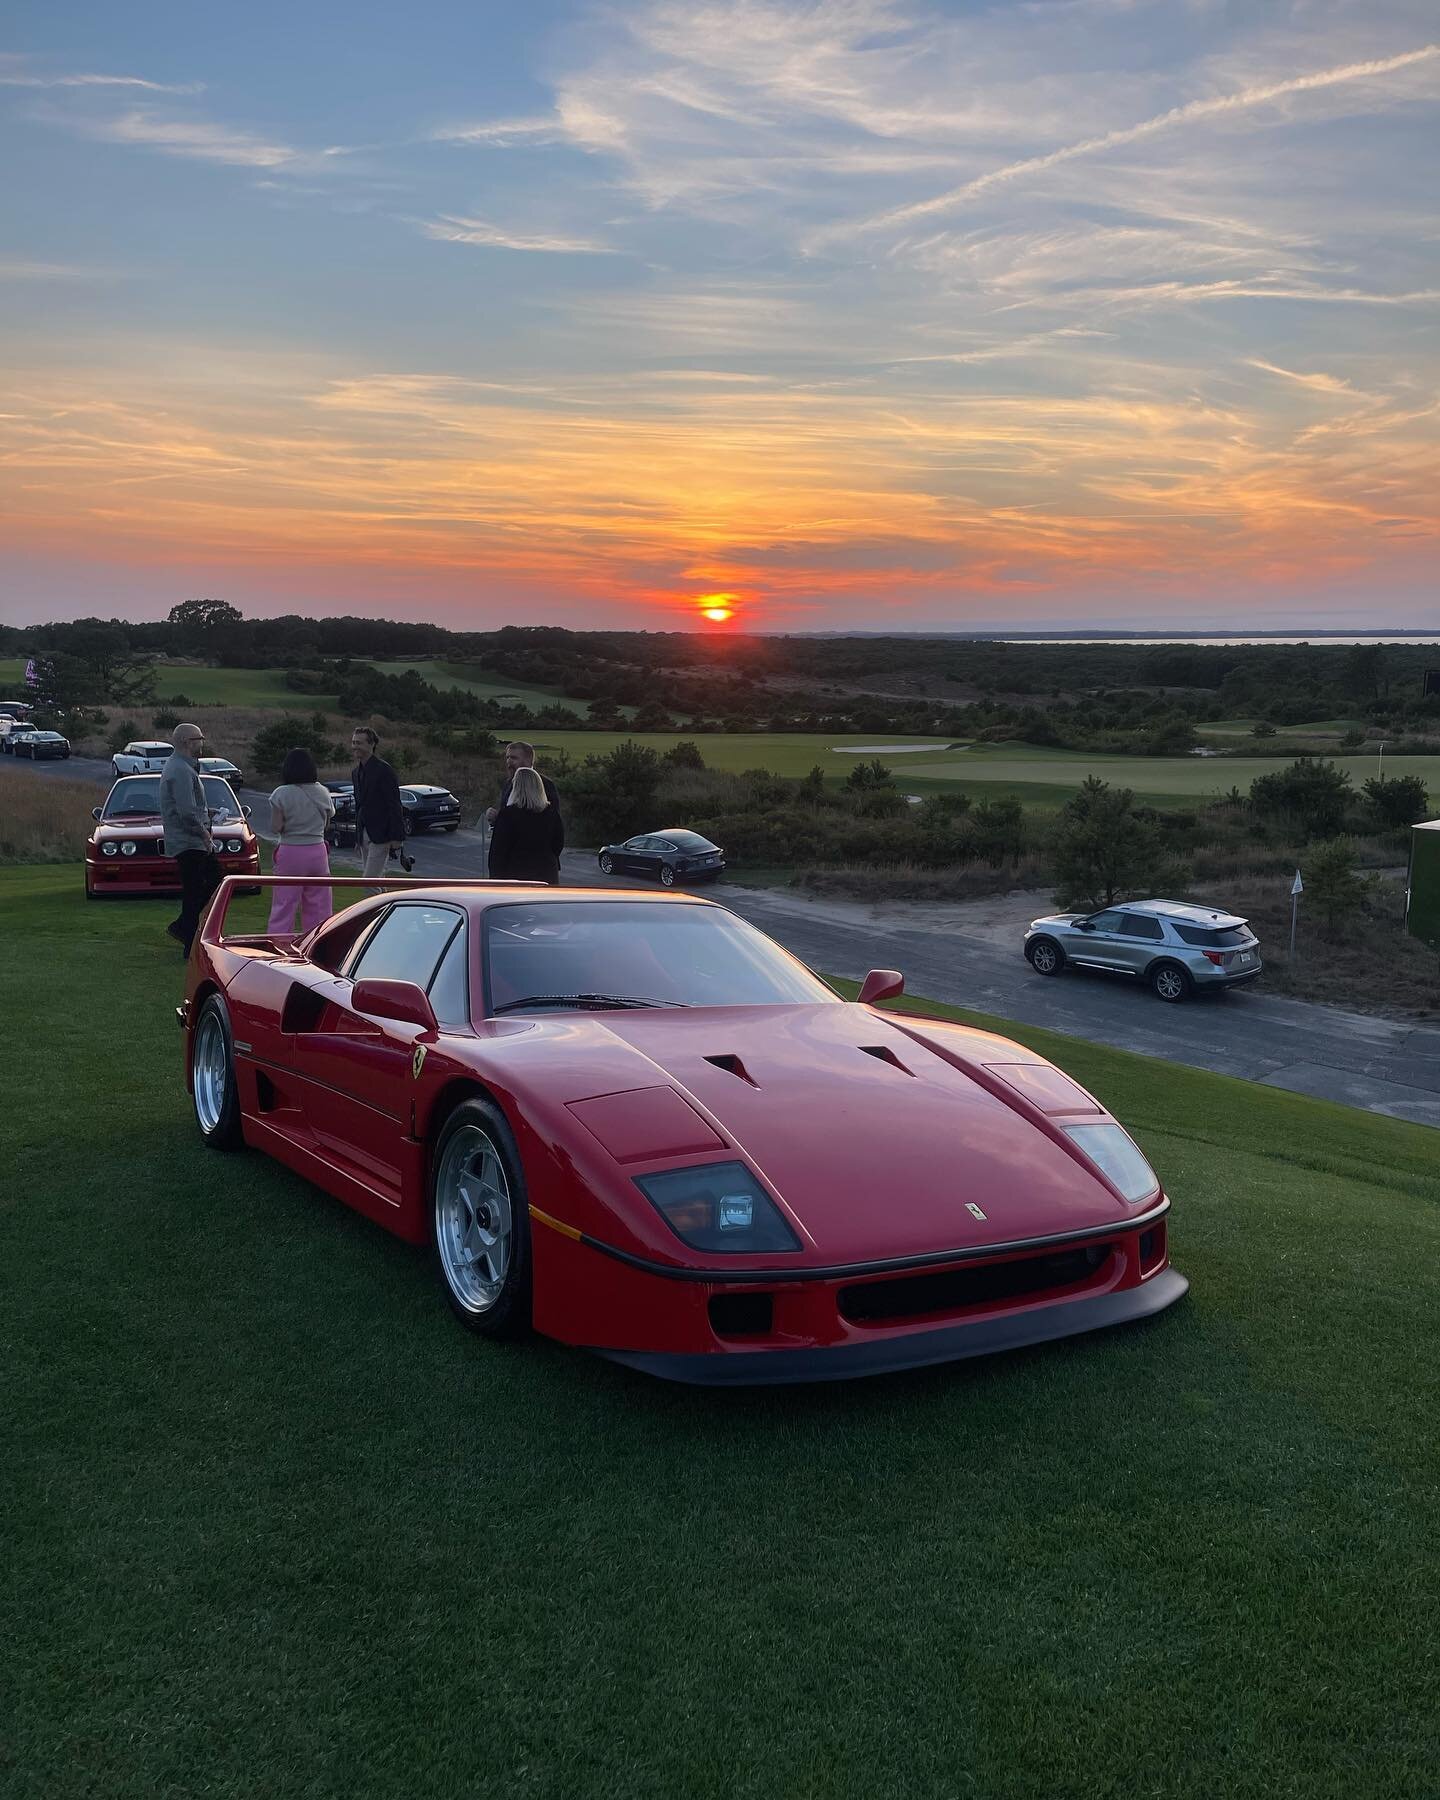 Hard to do Justice to @thebridge.hamptons setting and cars, too many really but here are some faves&hellip; #ferrari #lamborghini #porsche #delage #miura #thebridgevi #hamptons #carsofinstagram